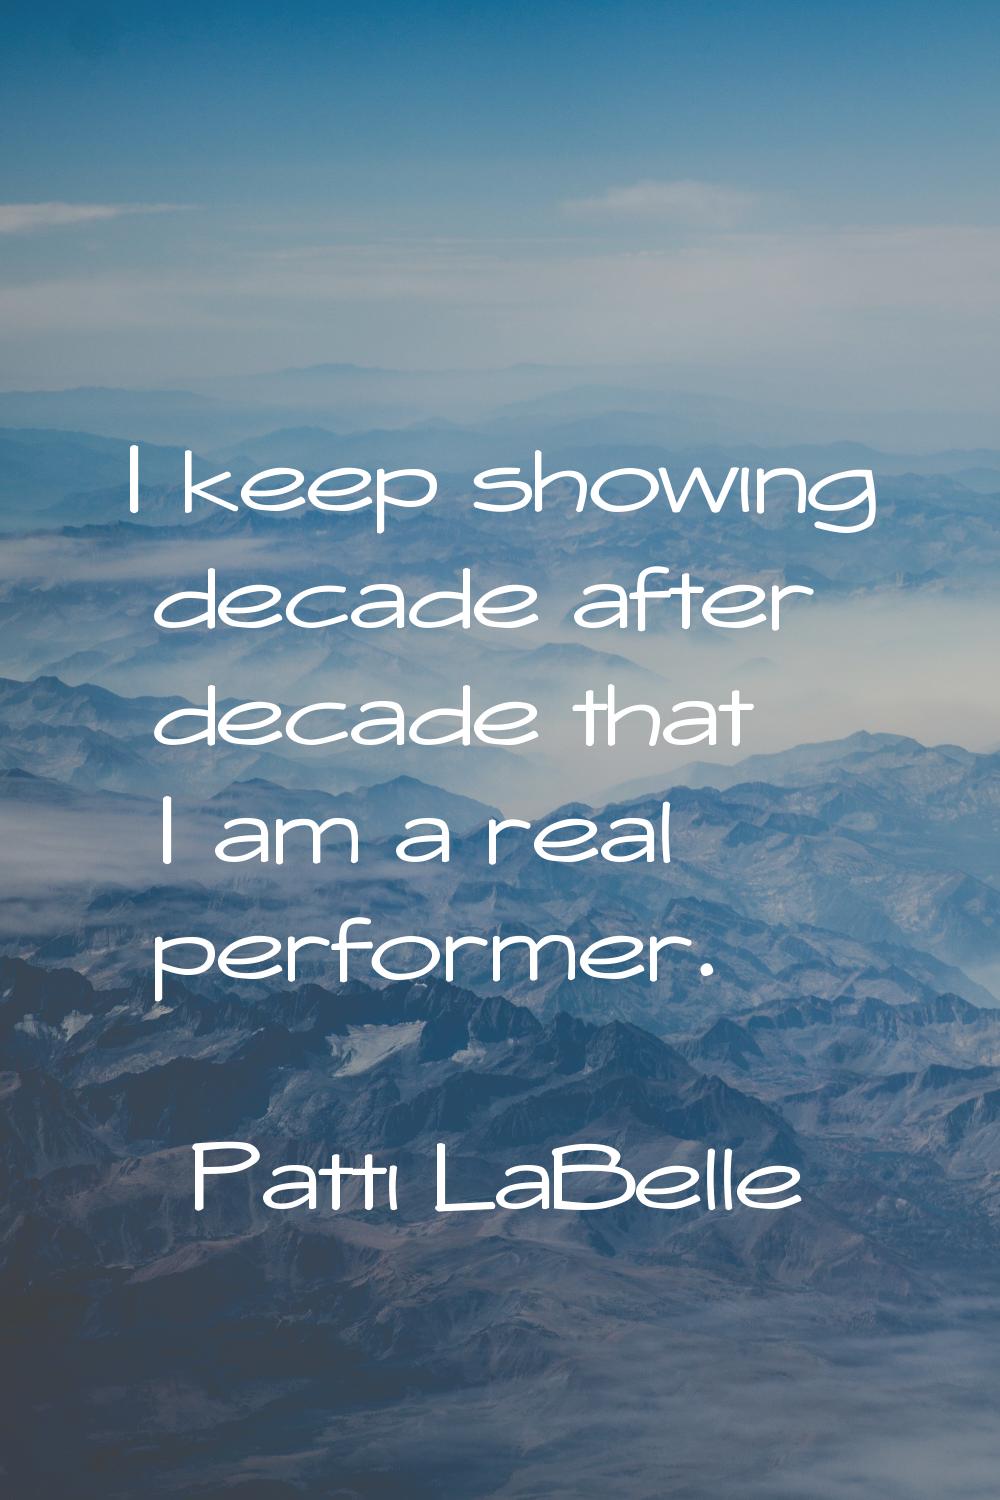 I keep showing decade after decade that I am a real performer.